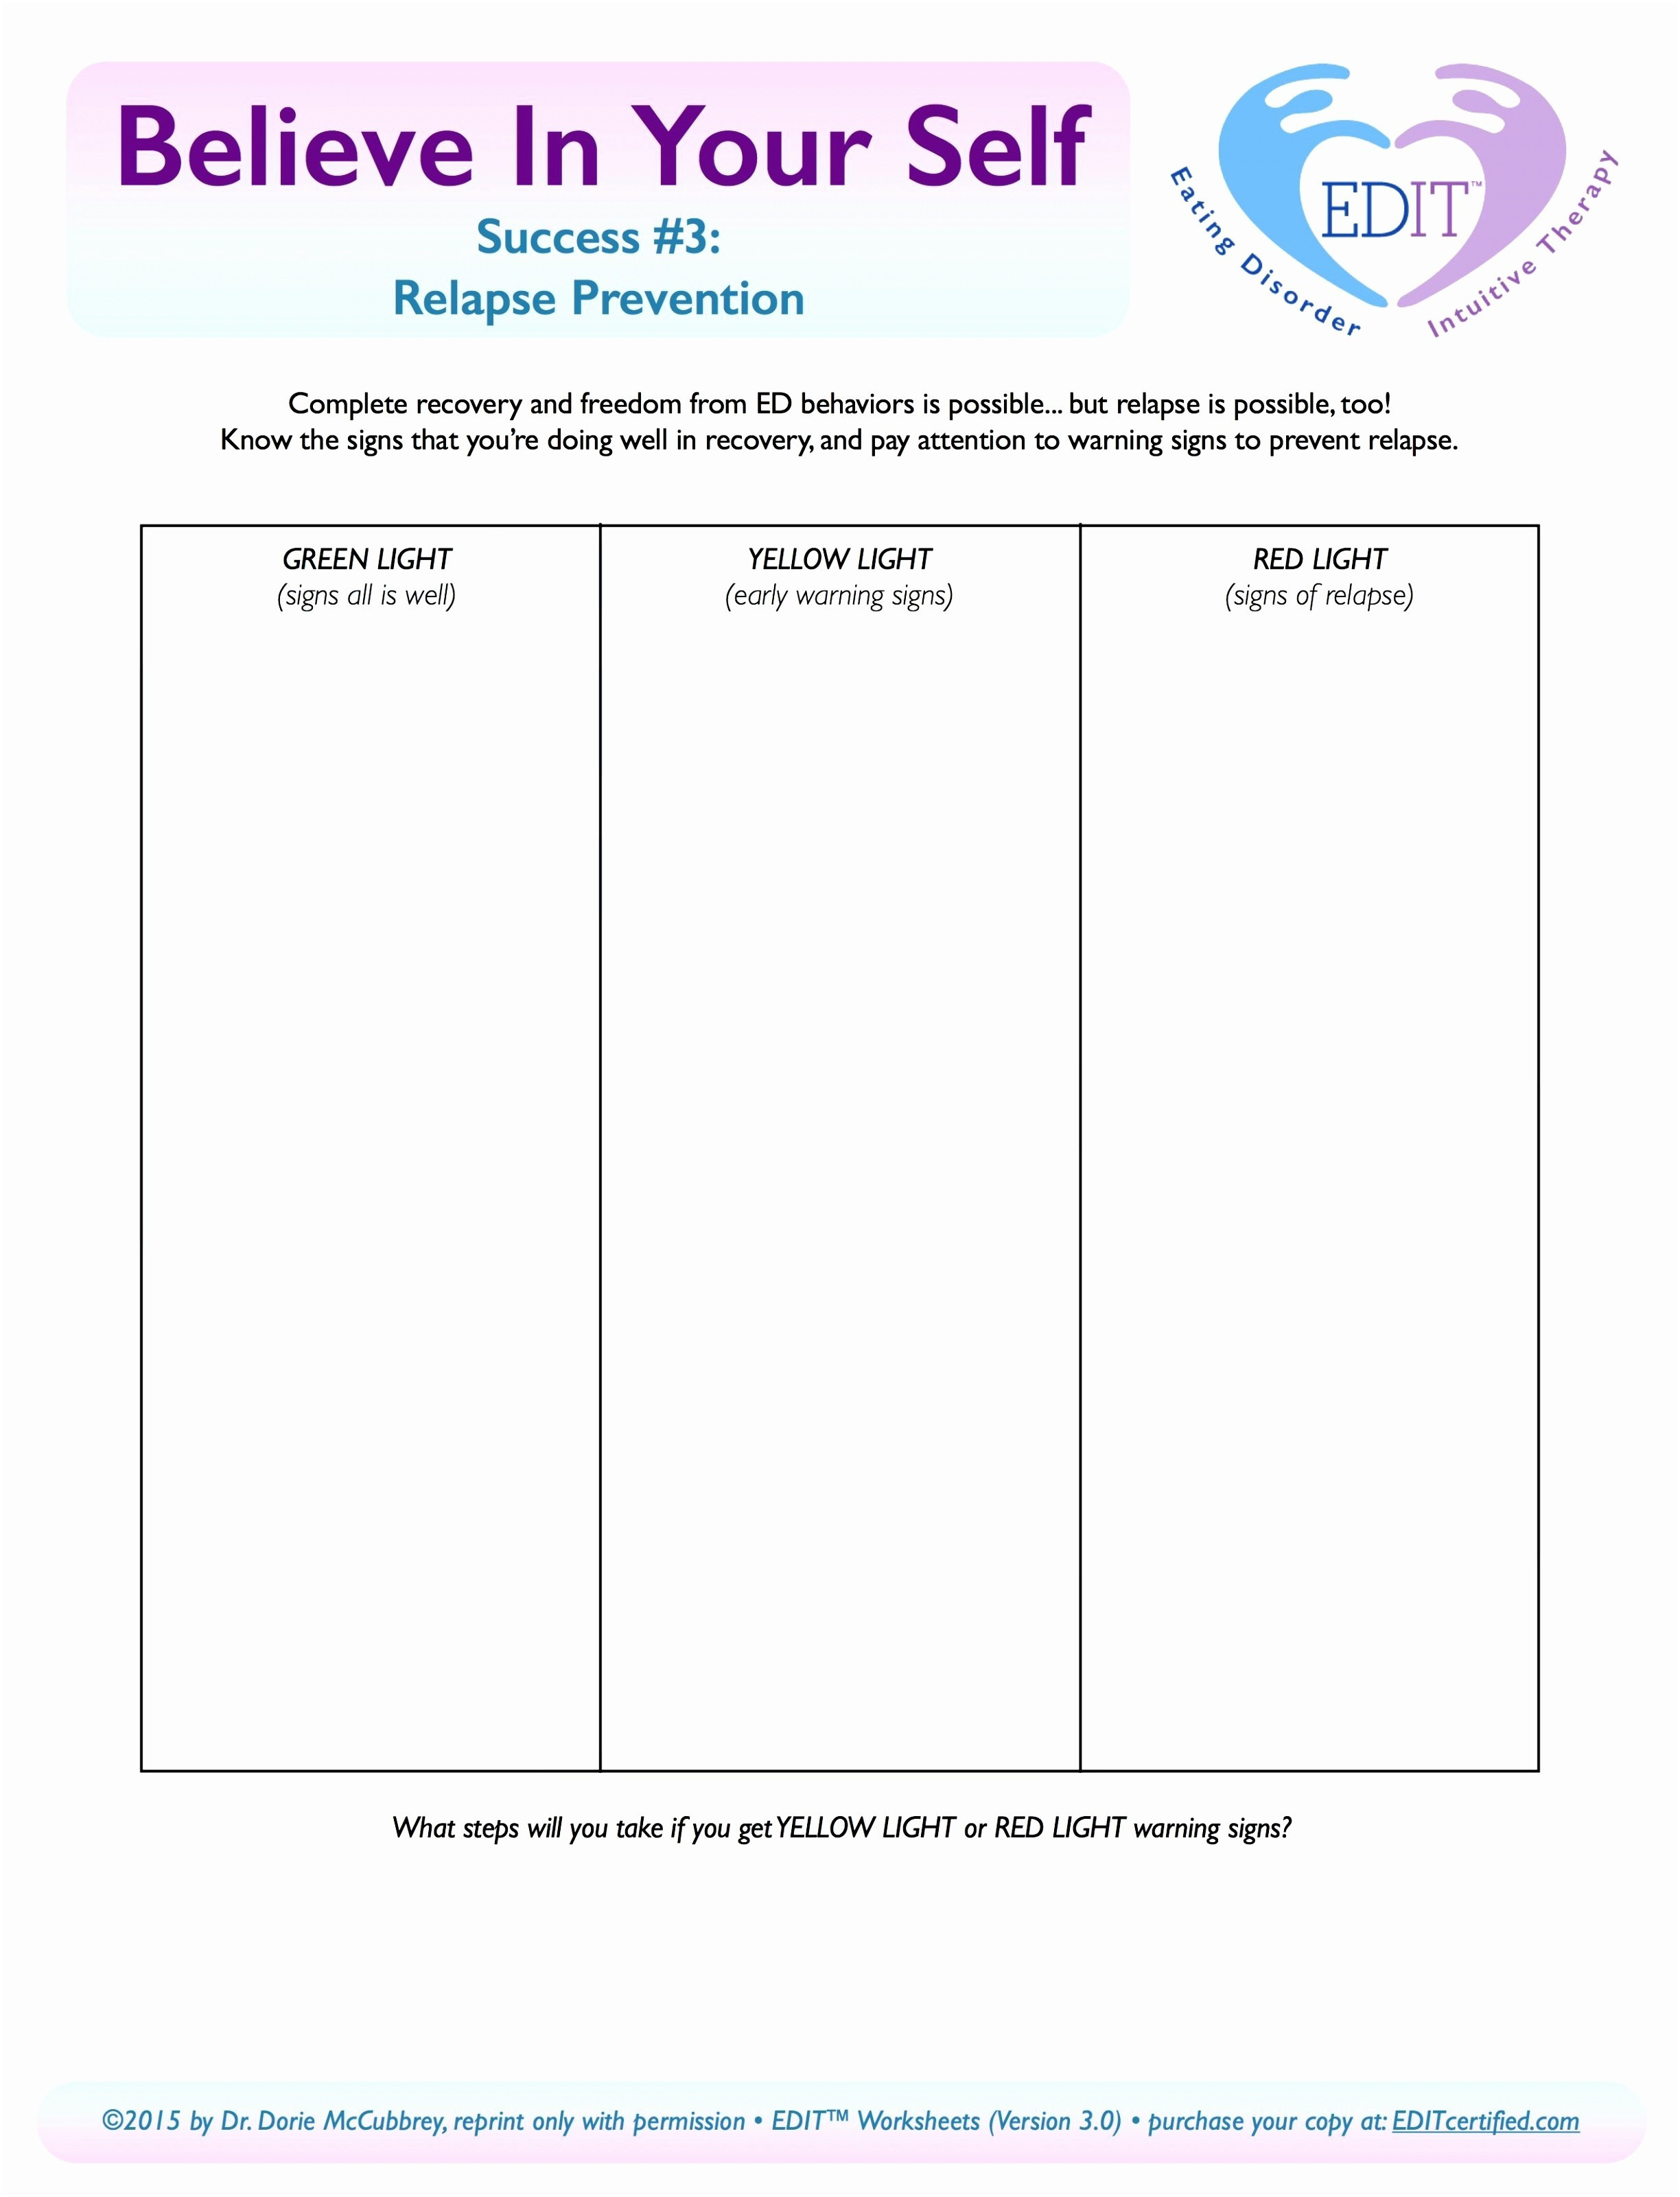 Relapse Prevention Worksheets To Free Download Relapse — db-excel.com